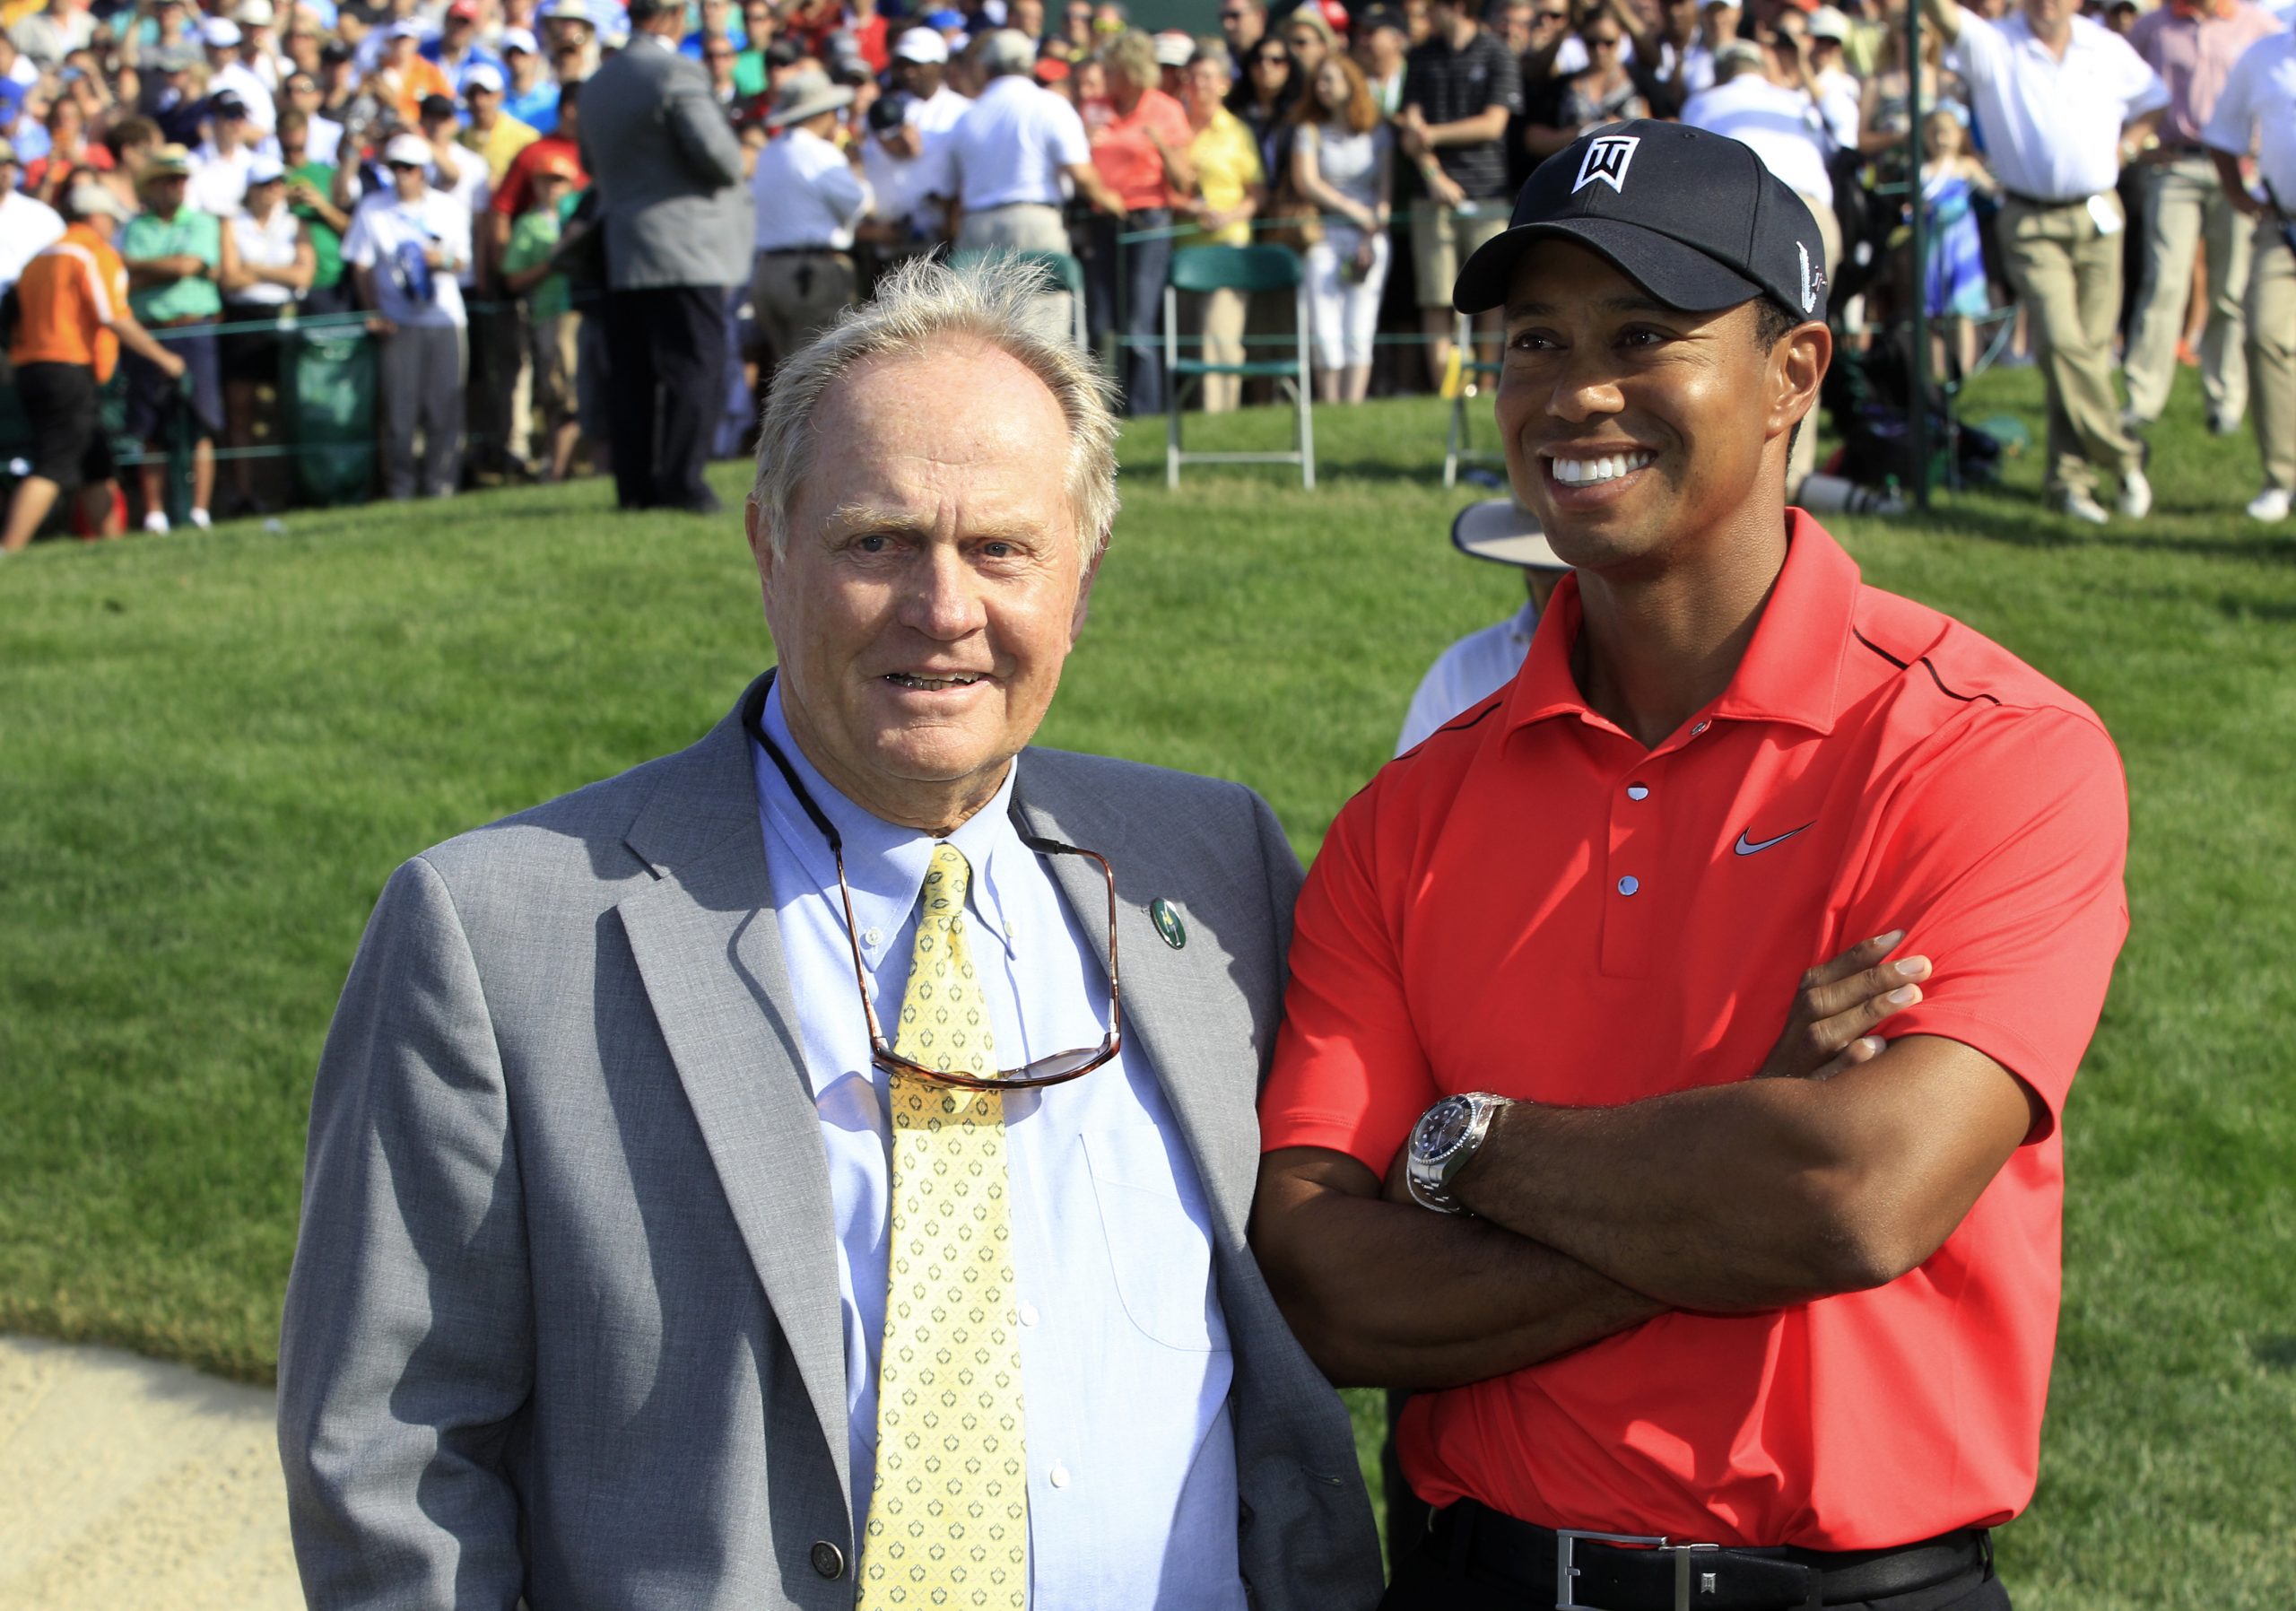 PGA legend Jack Nicklaus opened up on how he believes we'll see Tiger Woods return back to golf at some point in the future